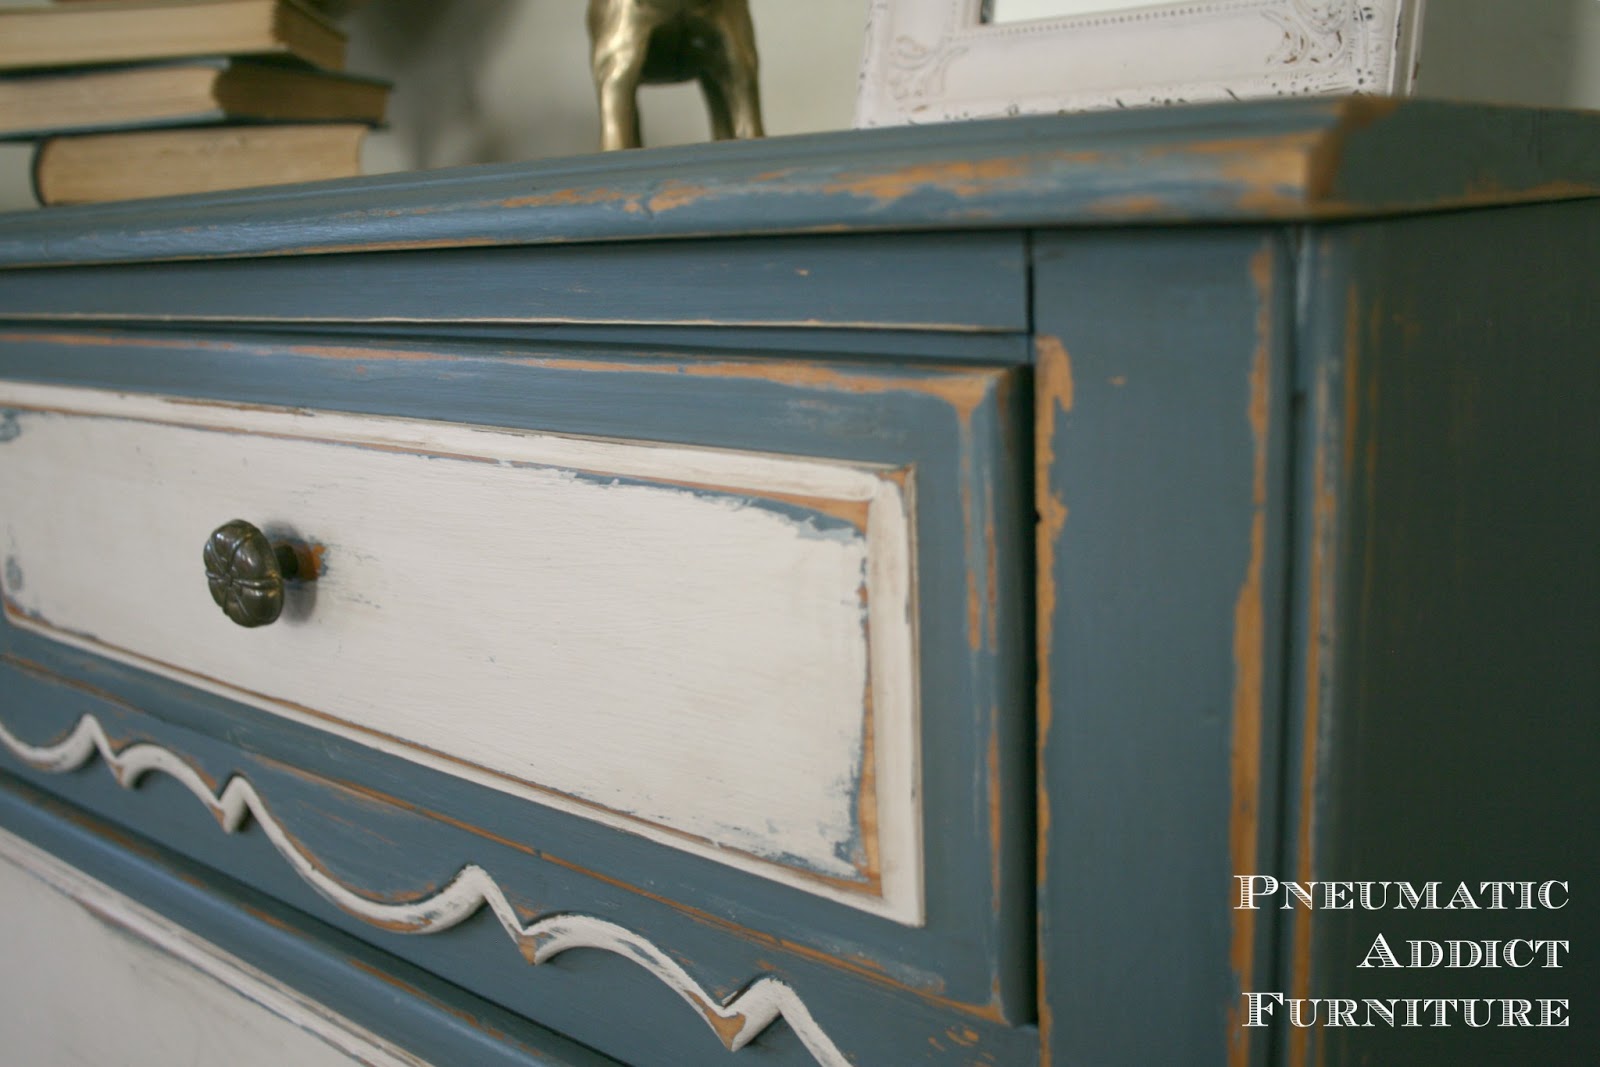 How to make and use a dark paste wax (for over chalk paint)